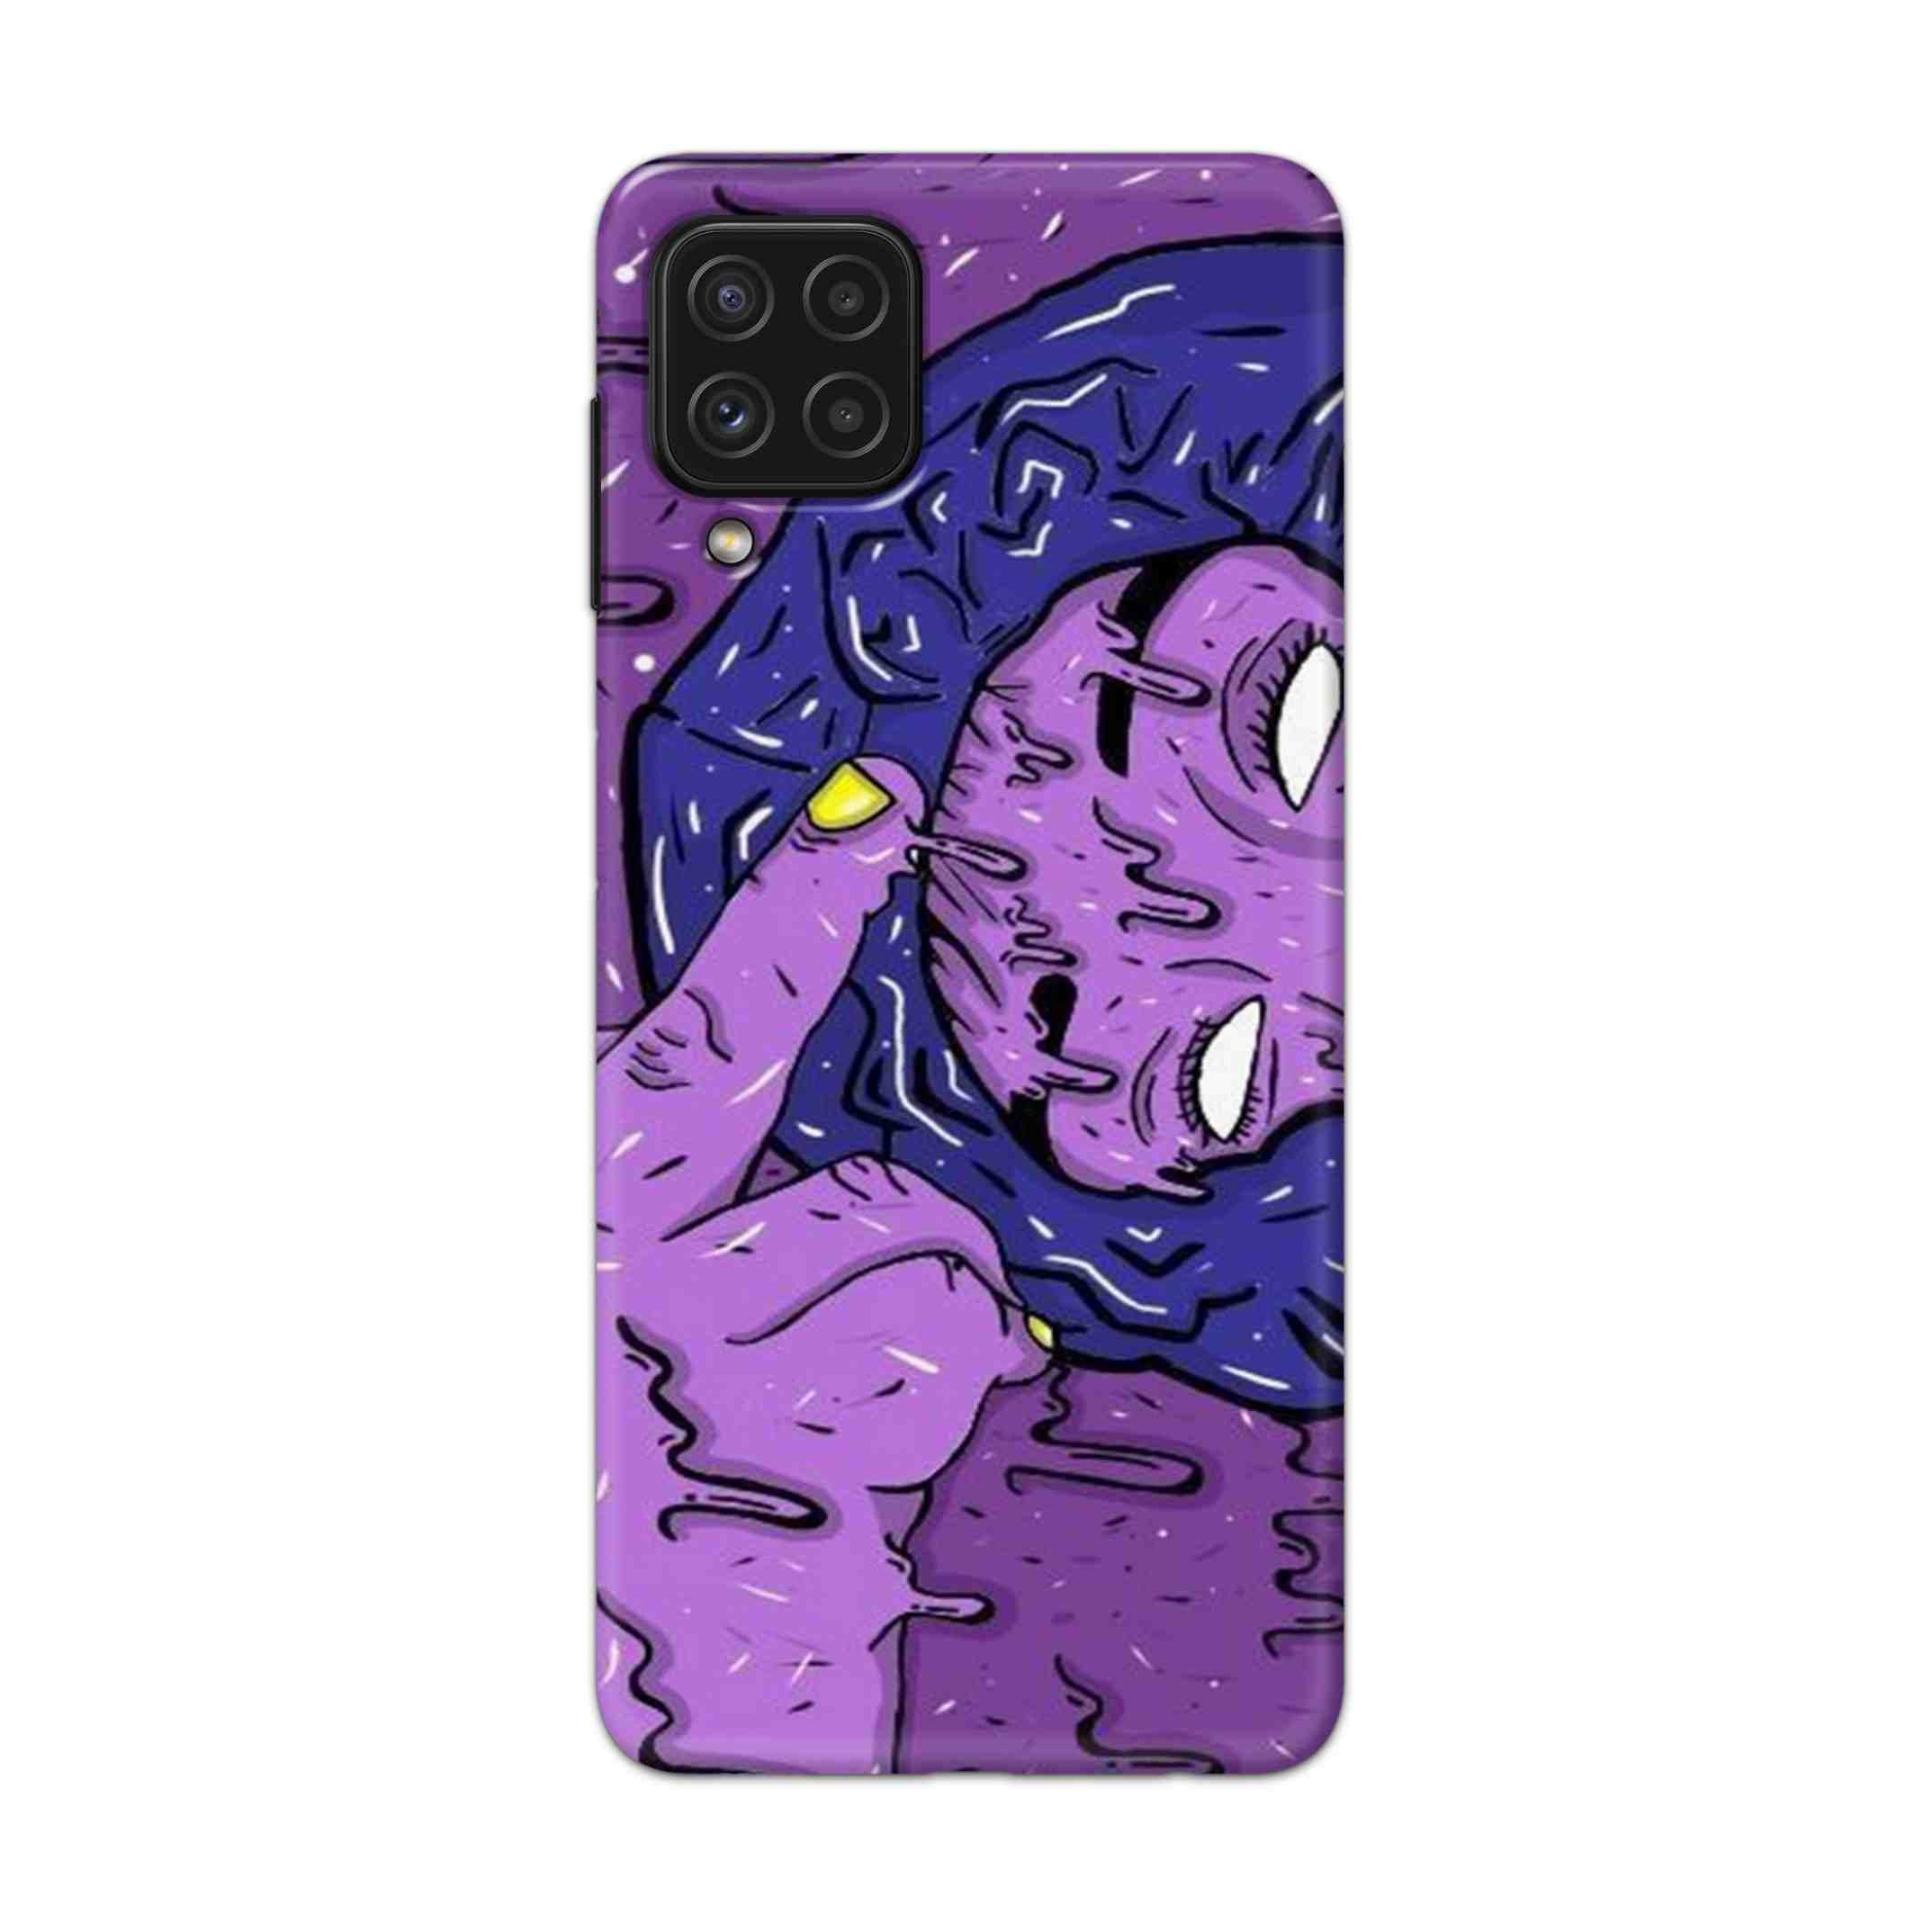 Buy Dashing Art Hard Back Mobile Phone Case Cover For Samsung Galaxy A22 Online